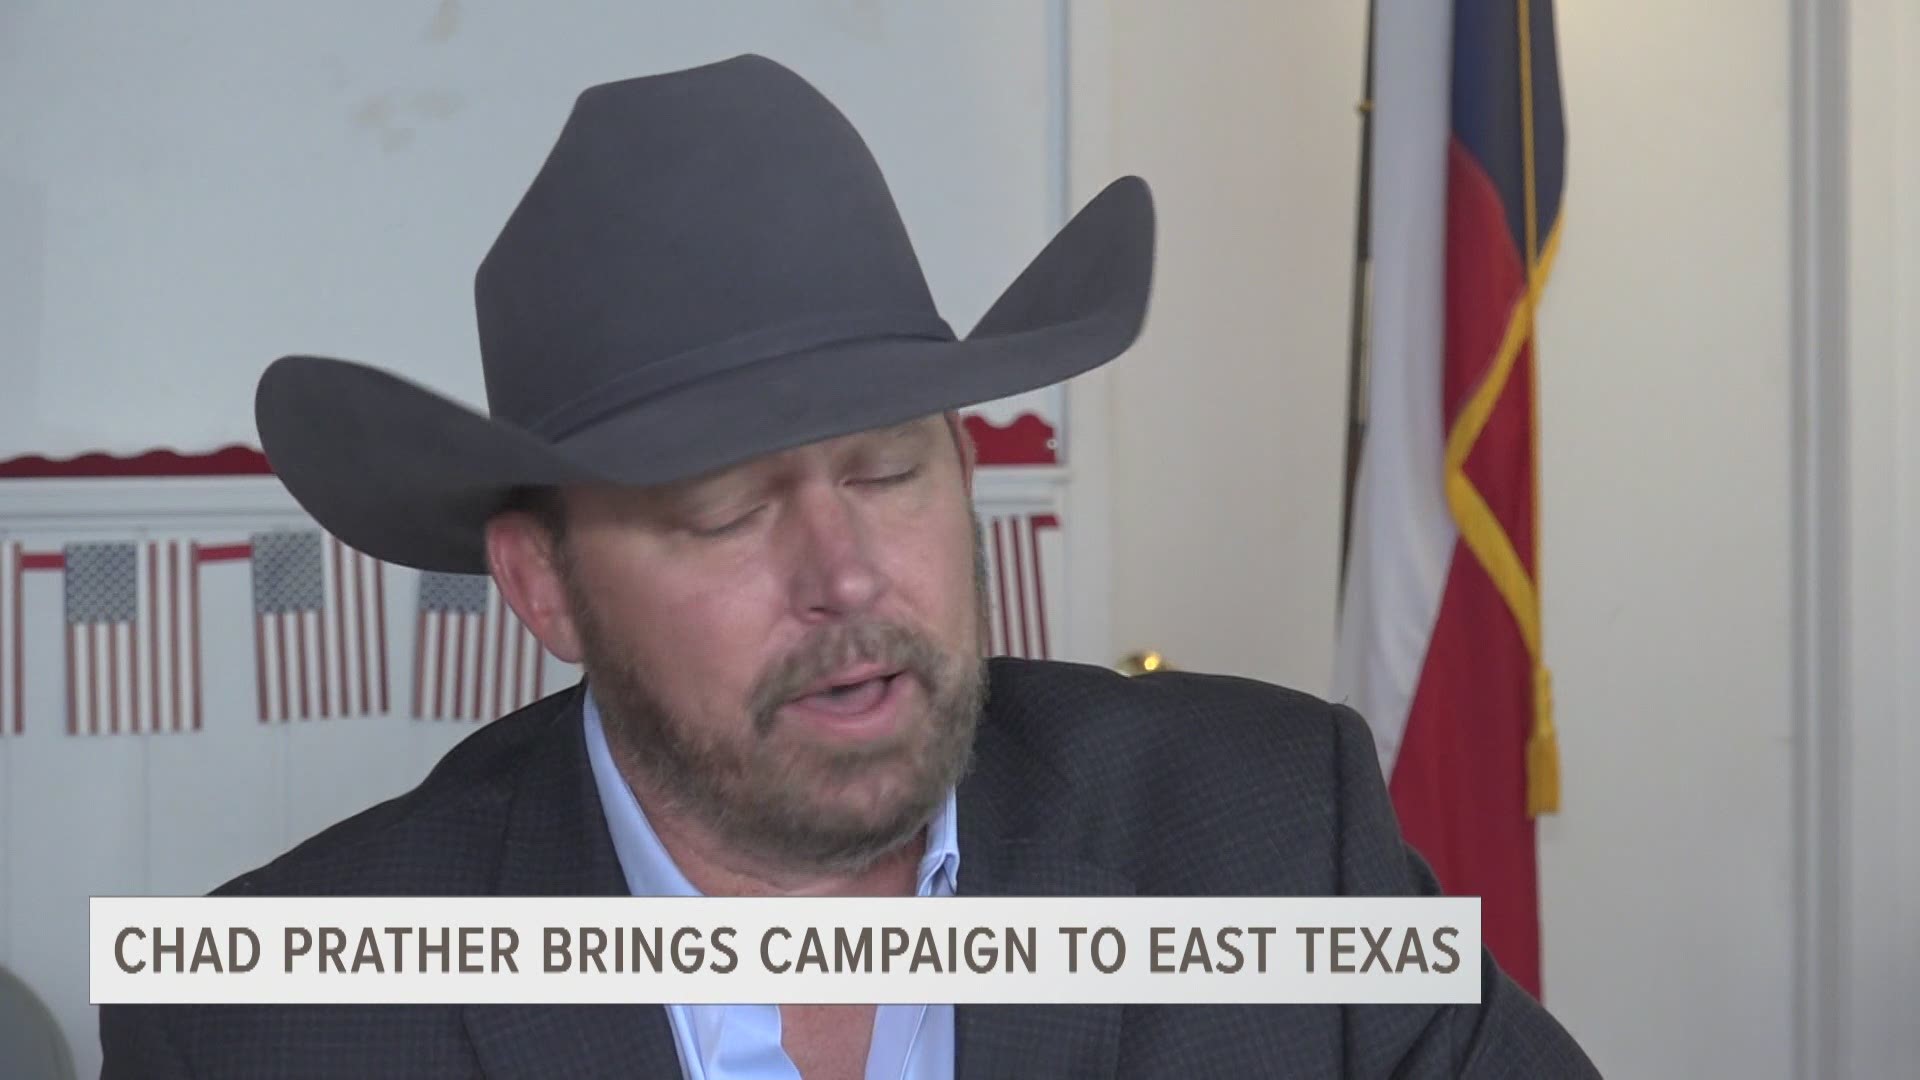 One-on-one with comedian and conservative political commentator Chad Prather about running to replace Texas Gov. Greg Abbott in 2022